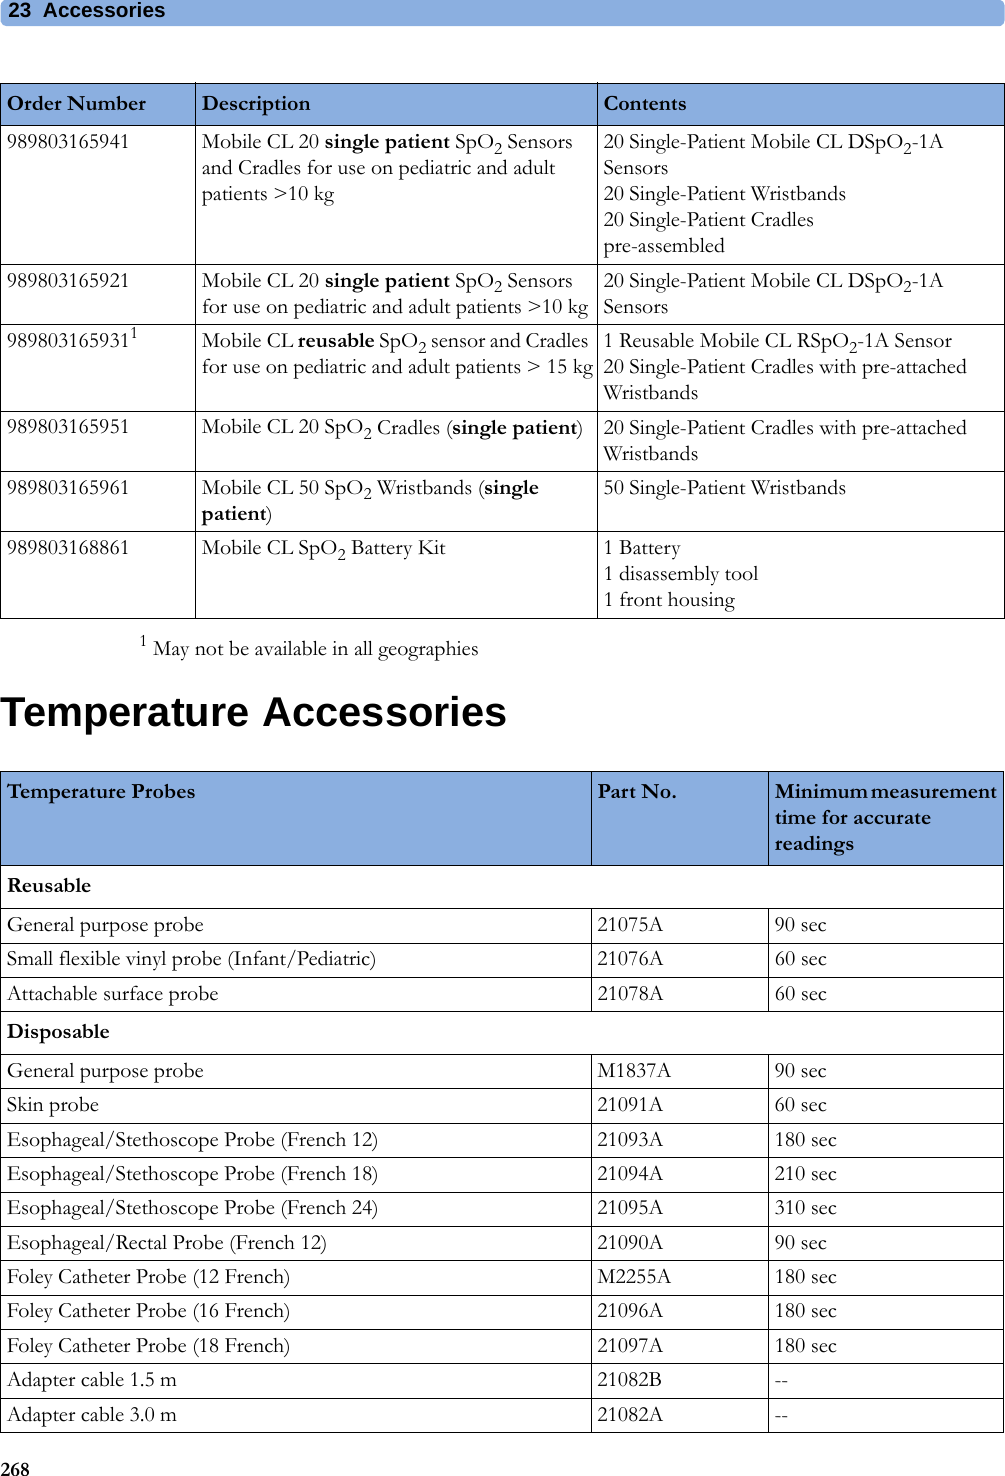 23 Accessories2681 May not be available in all geographiesTemperature AccessoriesOrder Number Description Contents989803165941 Mobile CL 20 single patient SpO2 Sensors and Cradles for use on pediatric and adult patients &gt;10 kg20 Single-Patient Mobile CL DSpO2-1A Sensors20 Single-Patient Wristbands20 Single-Patient Cradlespre-assembled989803165921 Mobile CL 20 single patient SpO2 Sensors for use on pediatric and adult patients &gt;10 kg20 Single-Patient Mobile CL DSpO2-1A Sensors9898031659311Mobile CL reusable SpO2 sensor and Cradles for use on pediatric and adult patients &gt; 15 kg1 Reusable Mobile CL RSpO2-1A Sensor20 Single-Patient Cradles with pre-attached Wristbands989803165951 Mobile CL 20 SpO2 Cradles (single patient) 20 Single-Patient Cradles with pre-attached Wristbands989803165961 Mobile CL 50 SpO2 Wristbands (single patient)50 Single-Patient Wristbands989803168861 Mobile CL SpO2 Battery Kit 1 Battery1 disassembly tool1 front housingTemperature Probes Part No. Minimum measurement time for accurate readingsReusableGeneral purpose probe 21075A 90 secSmall flexible vinyl probe (Infant/Pediatric) 21076A 60 secAttachable surface probe 21078A 60 secDisposableGeneral purpose probe M1837A 90 secSkin probe 21091A 60 secEsophageal/Stethoscope Probe (French 12) 21093A 180 secEsophageal/Stethoscope Probe (French 18) 21094A 210 secEsophageal/Stethoscope Probe (French 24) 21095A 310 secEsophageal/Rectal Probe (French 12) 21090A 90 secFoley Catheter Probe (12 French) M2255A 180 secFoley Catheter Probe (16 French) 21096A 180 secFoley Catheter Probe (18 French) 21097A 180 secAdapter cable 1.5 m 21082B --Adapter cable 3.0 m 21082A --